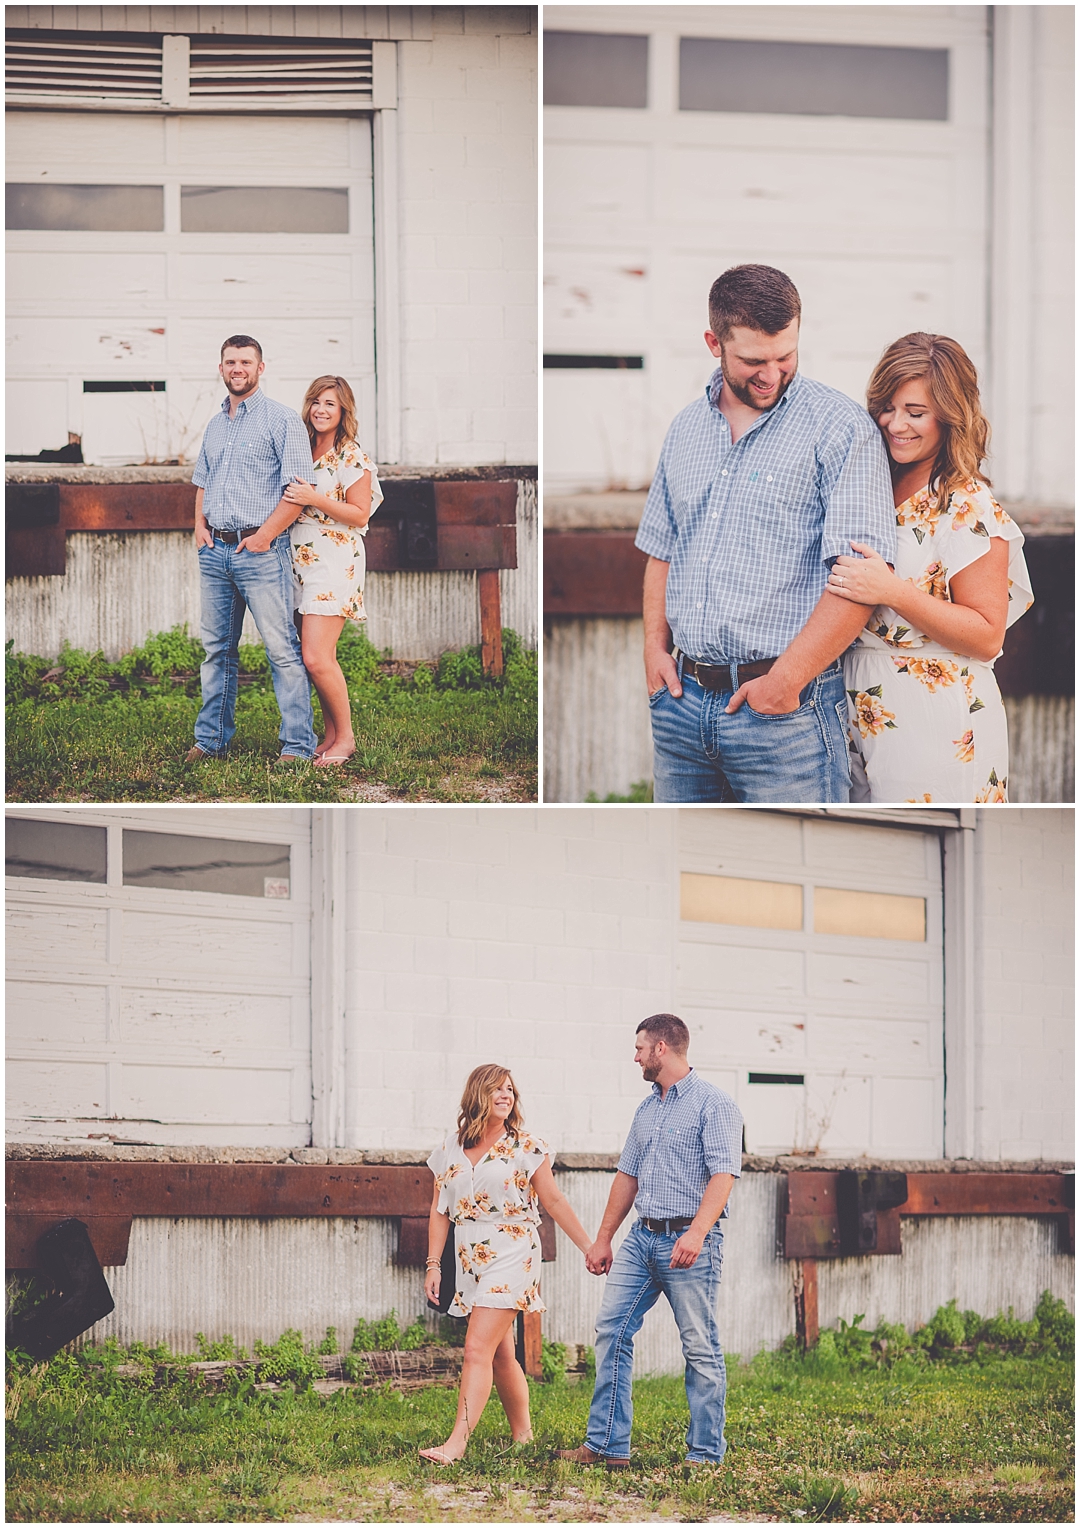 Kara Evans Photographer - Wedding Wednesday Blogger - Four Tips for Planning Your Engagement Session Outfits - Engagement Session Outfit Guide - E-Session Outfit Ideas